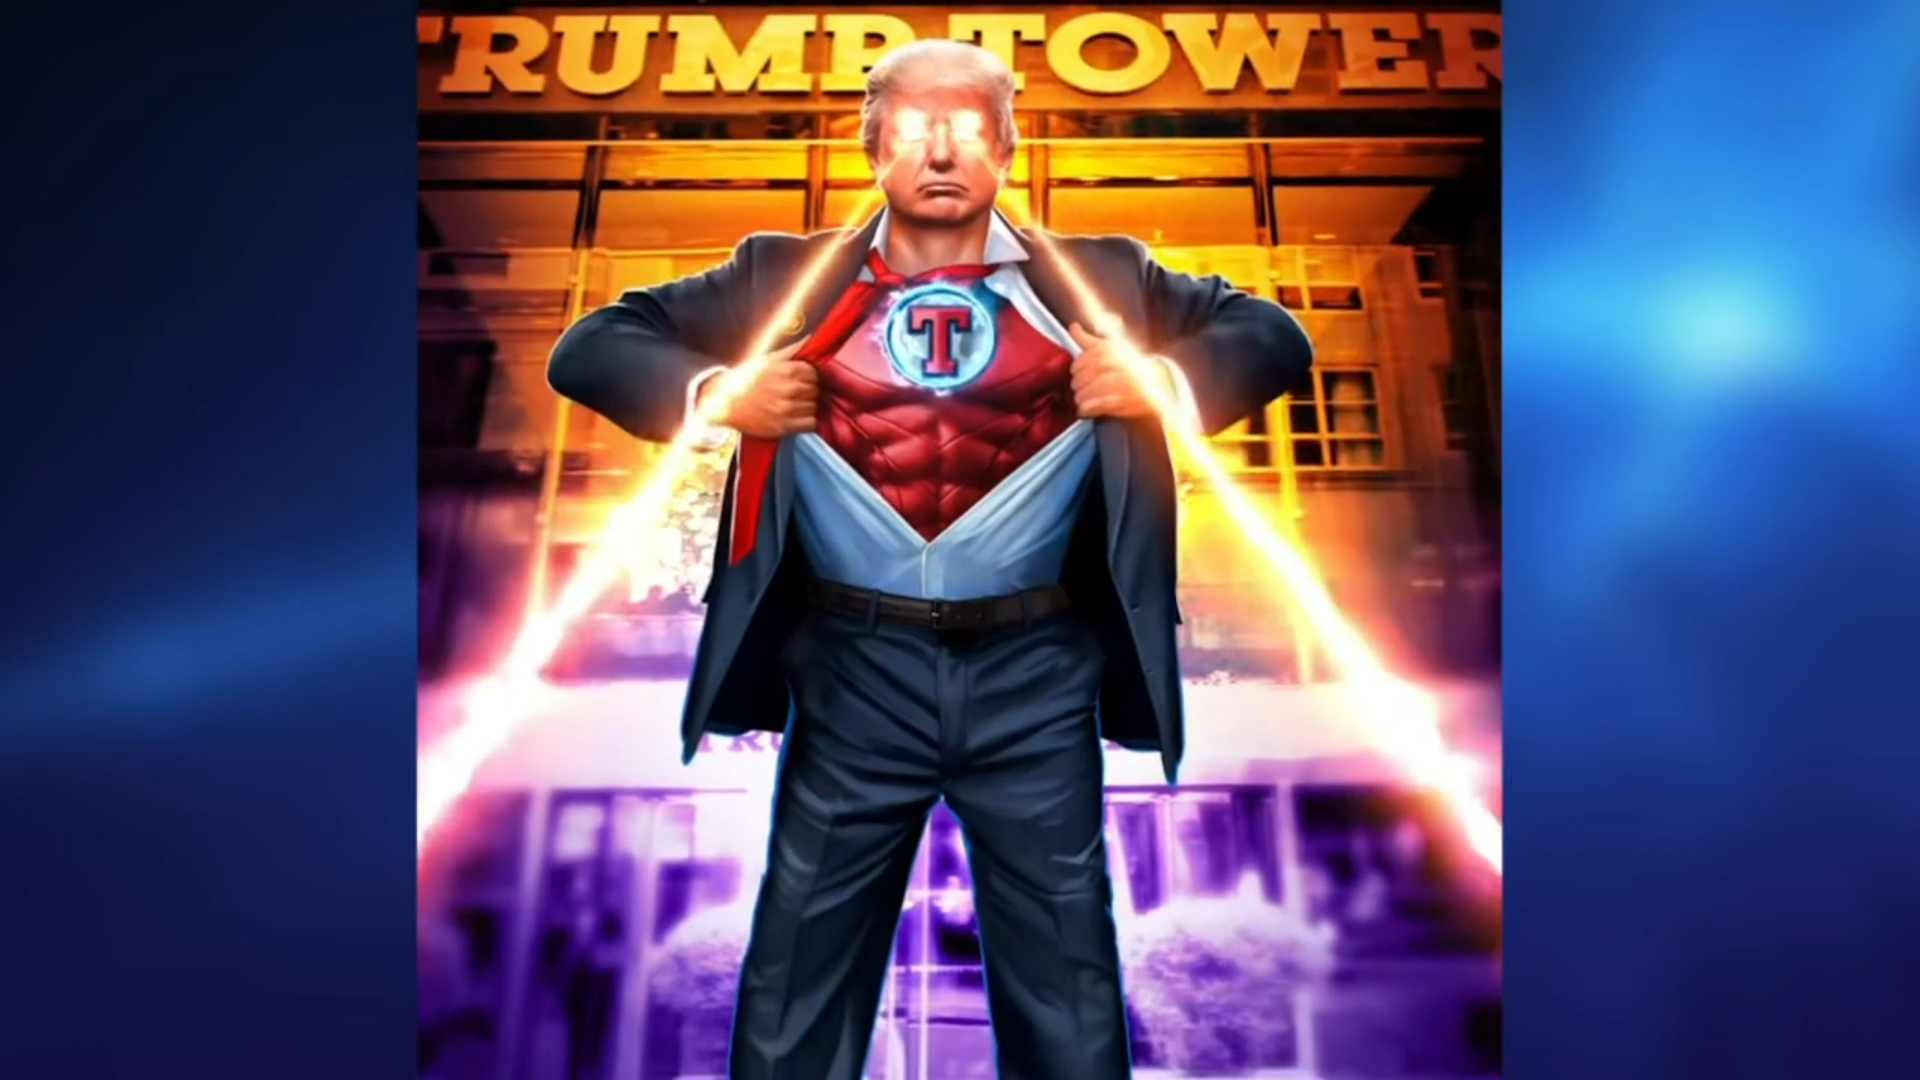 Donald Trump as a superhero. From the Trump Cards NFT collection.